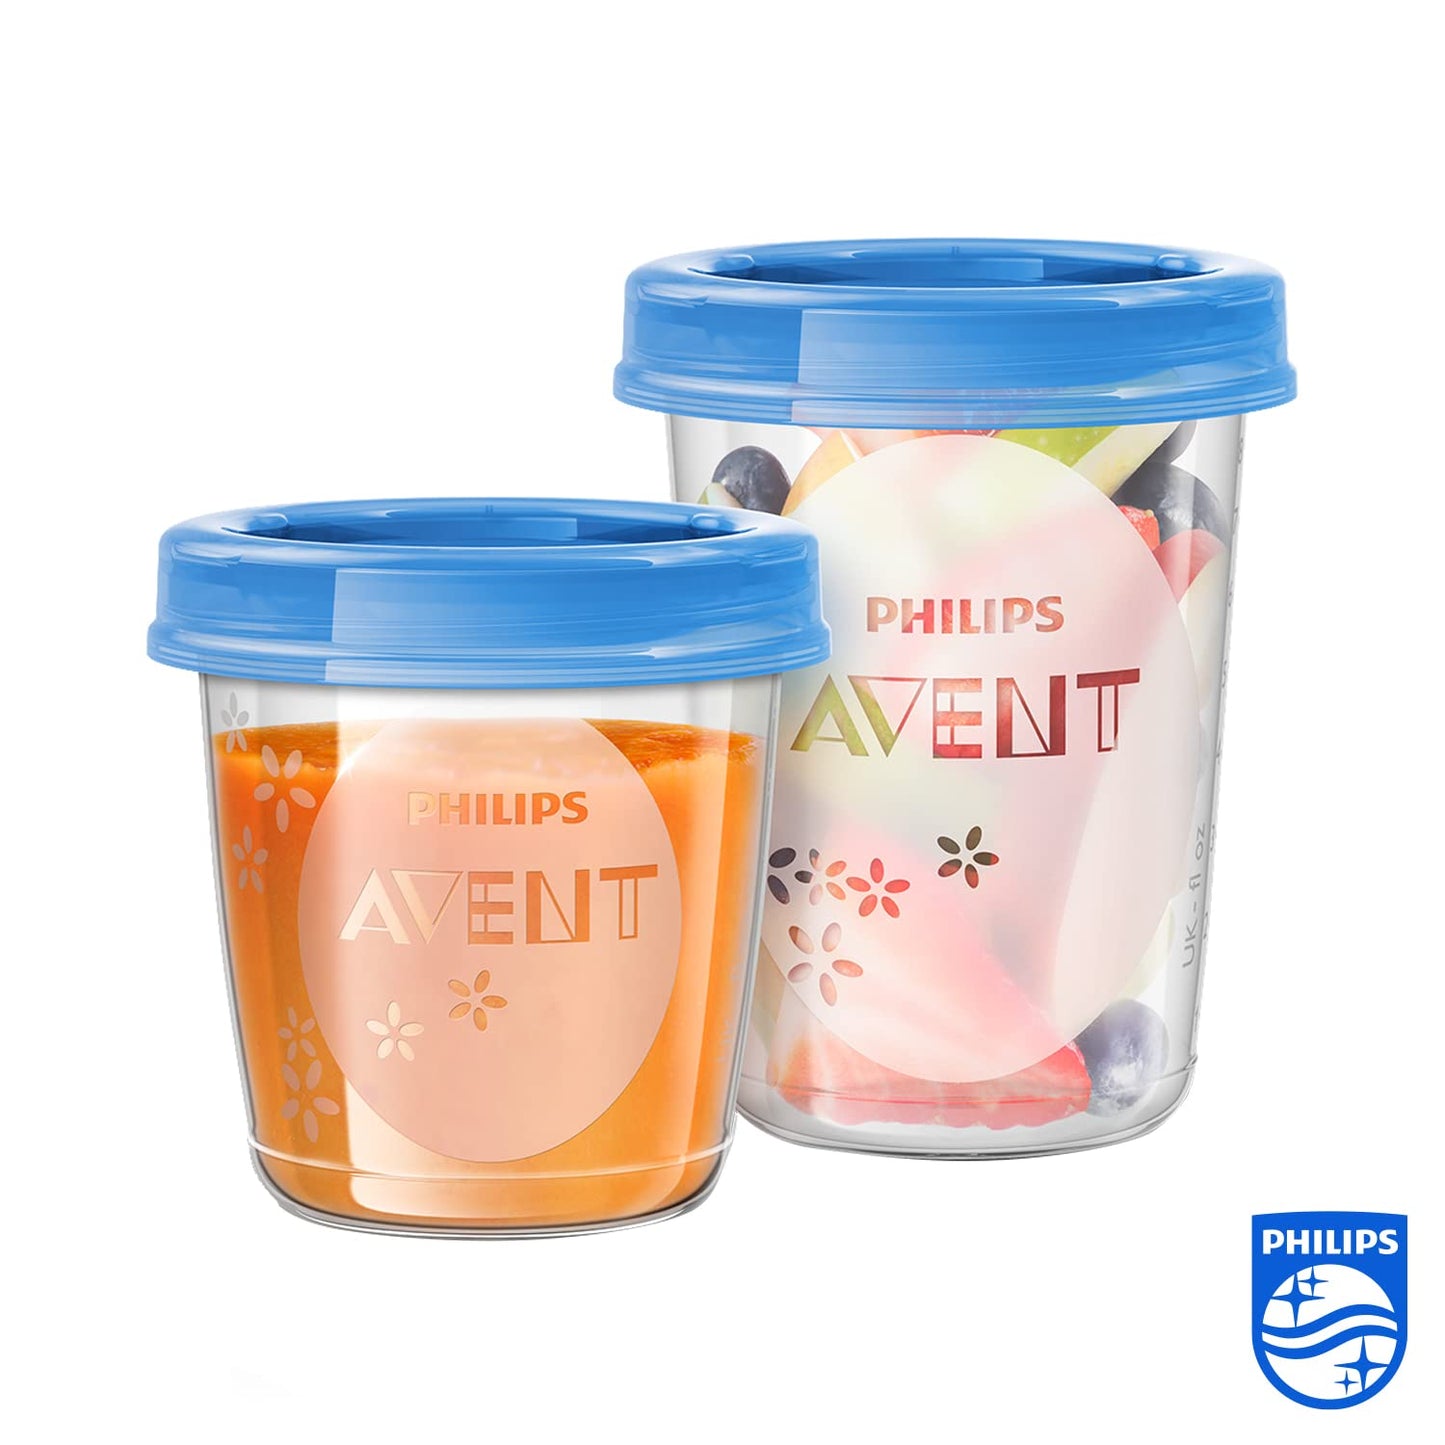 Philips Avent SCF721/20 Baby Food Storage Cups Pack of 20 (10 x 180 ml, 10 x 240 ml), with Screw Lid - Baby Bliss